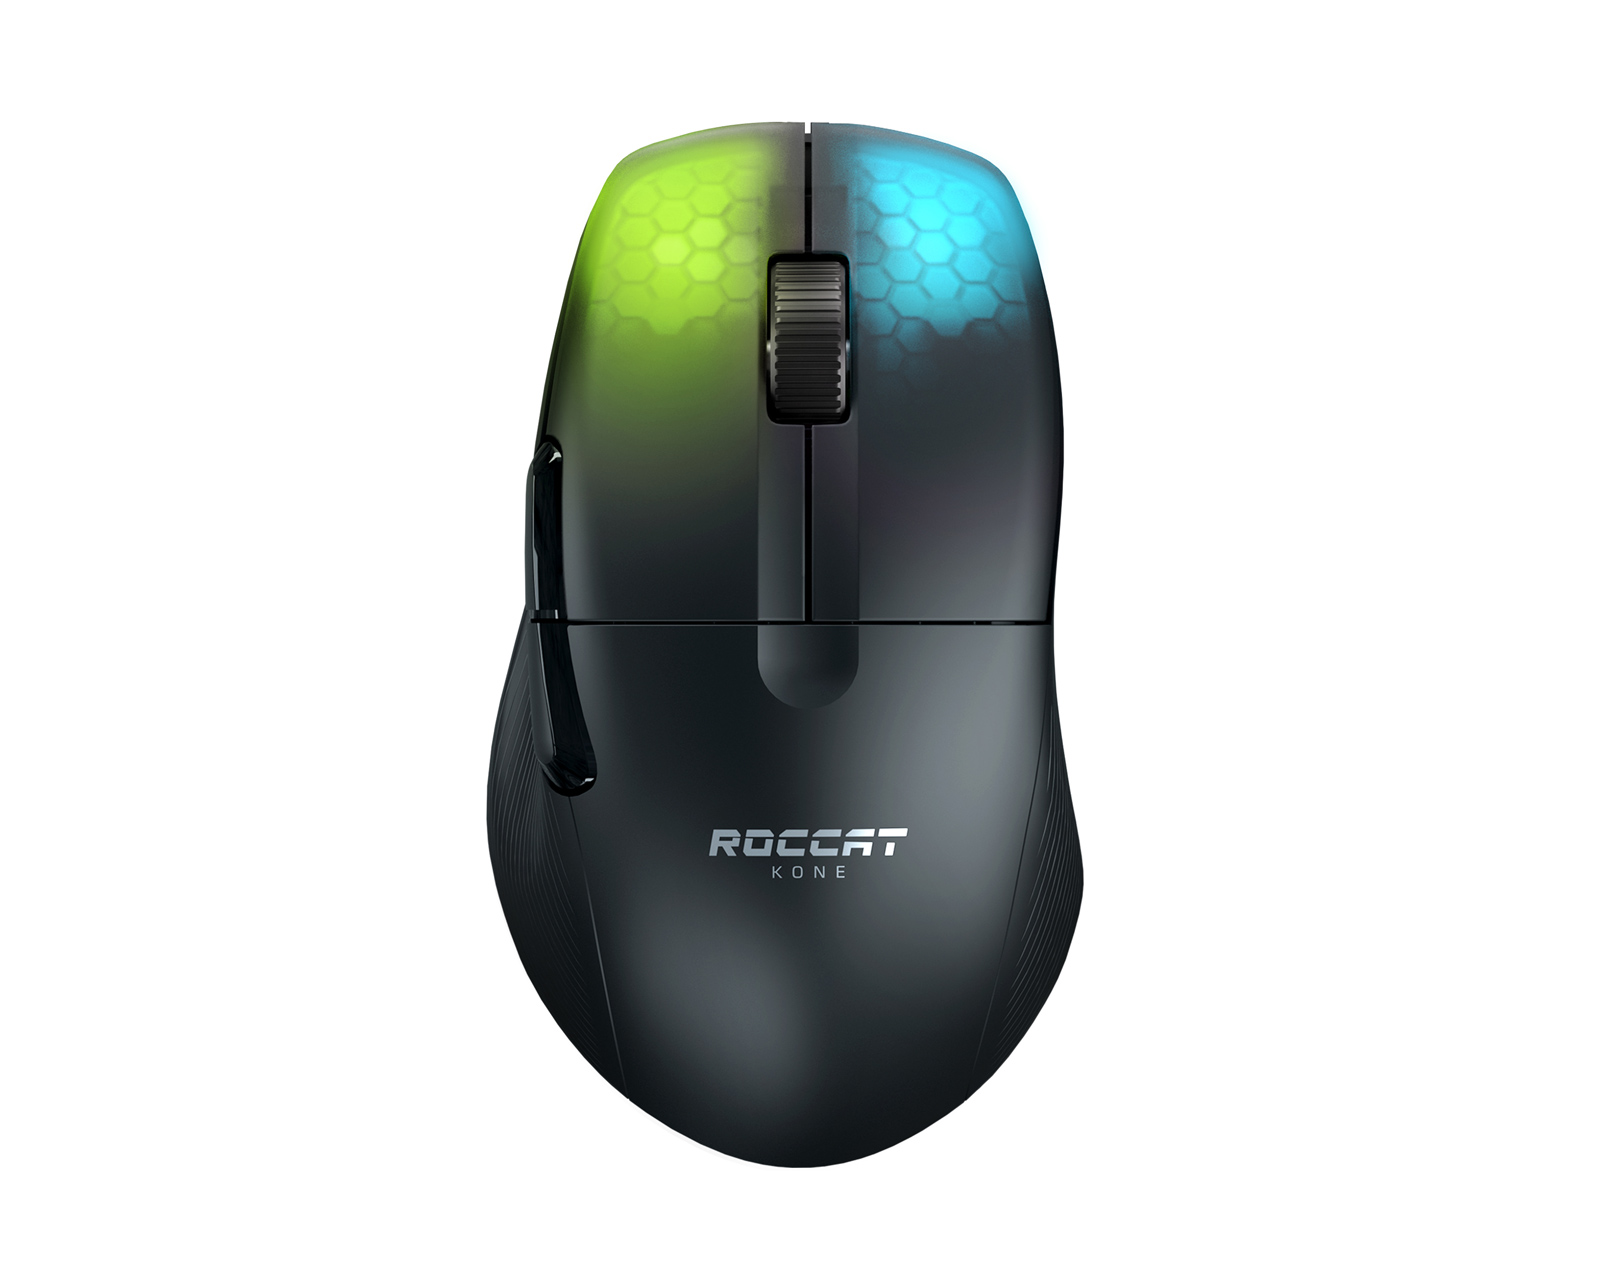 Roccat Kone XP Air review – great gaming mouse specs and RGB